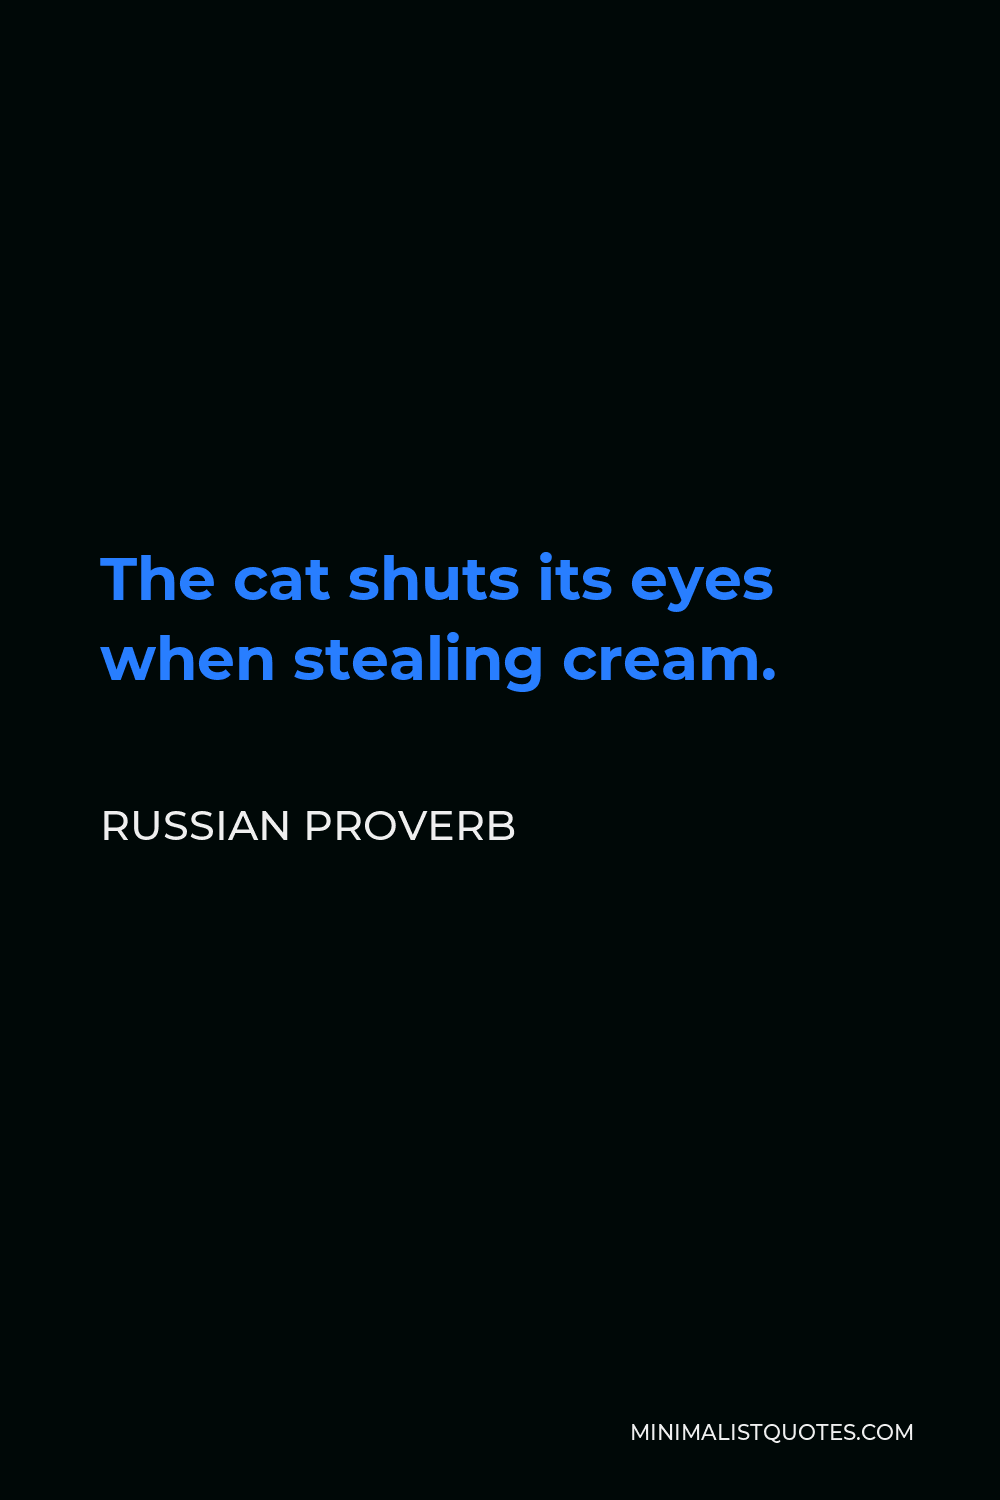 Russian Proverb Quote - The cat shuts its eyes when stealing cream.